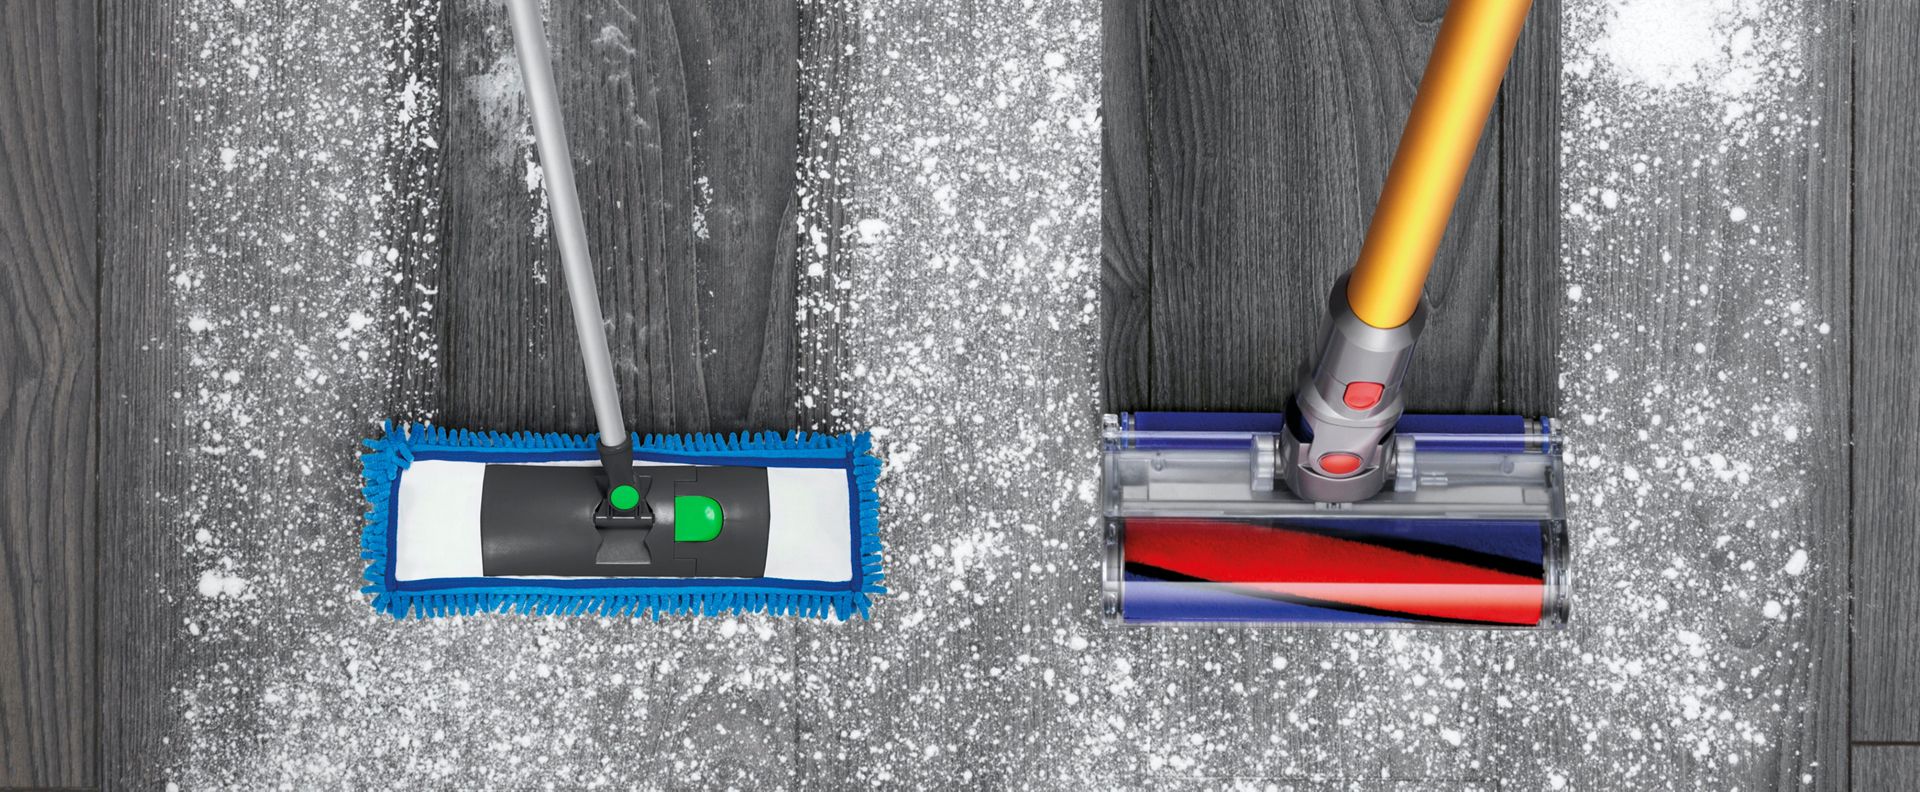 How To use A MOP Brush correctly! Step by step 